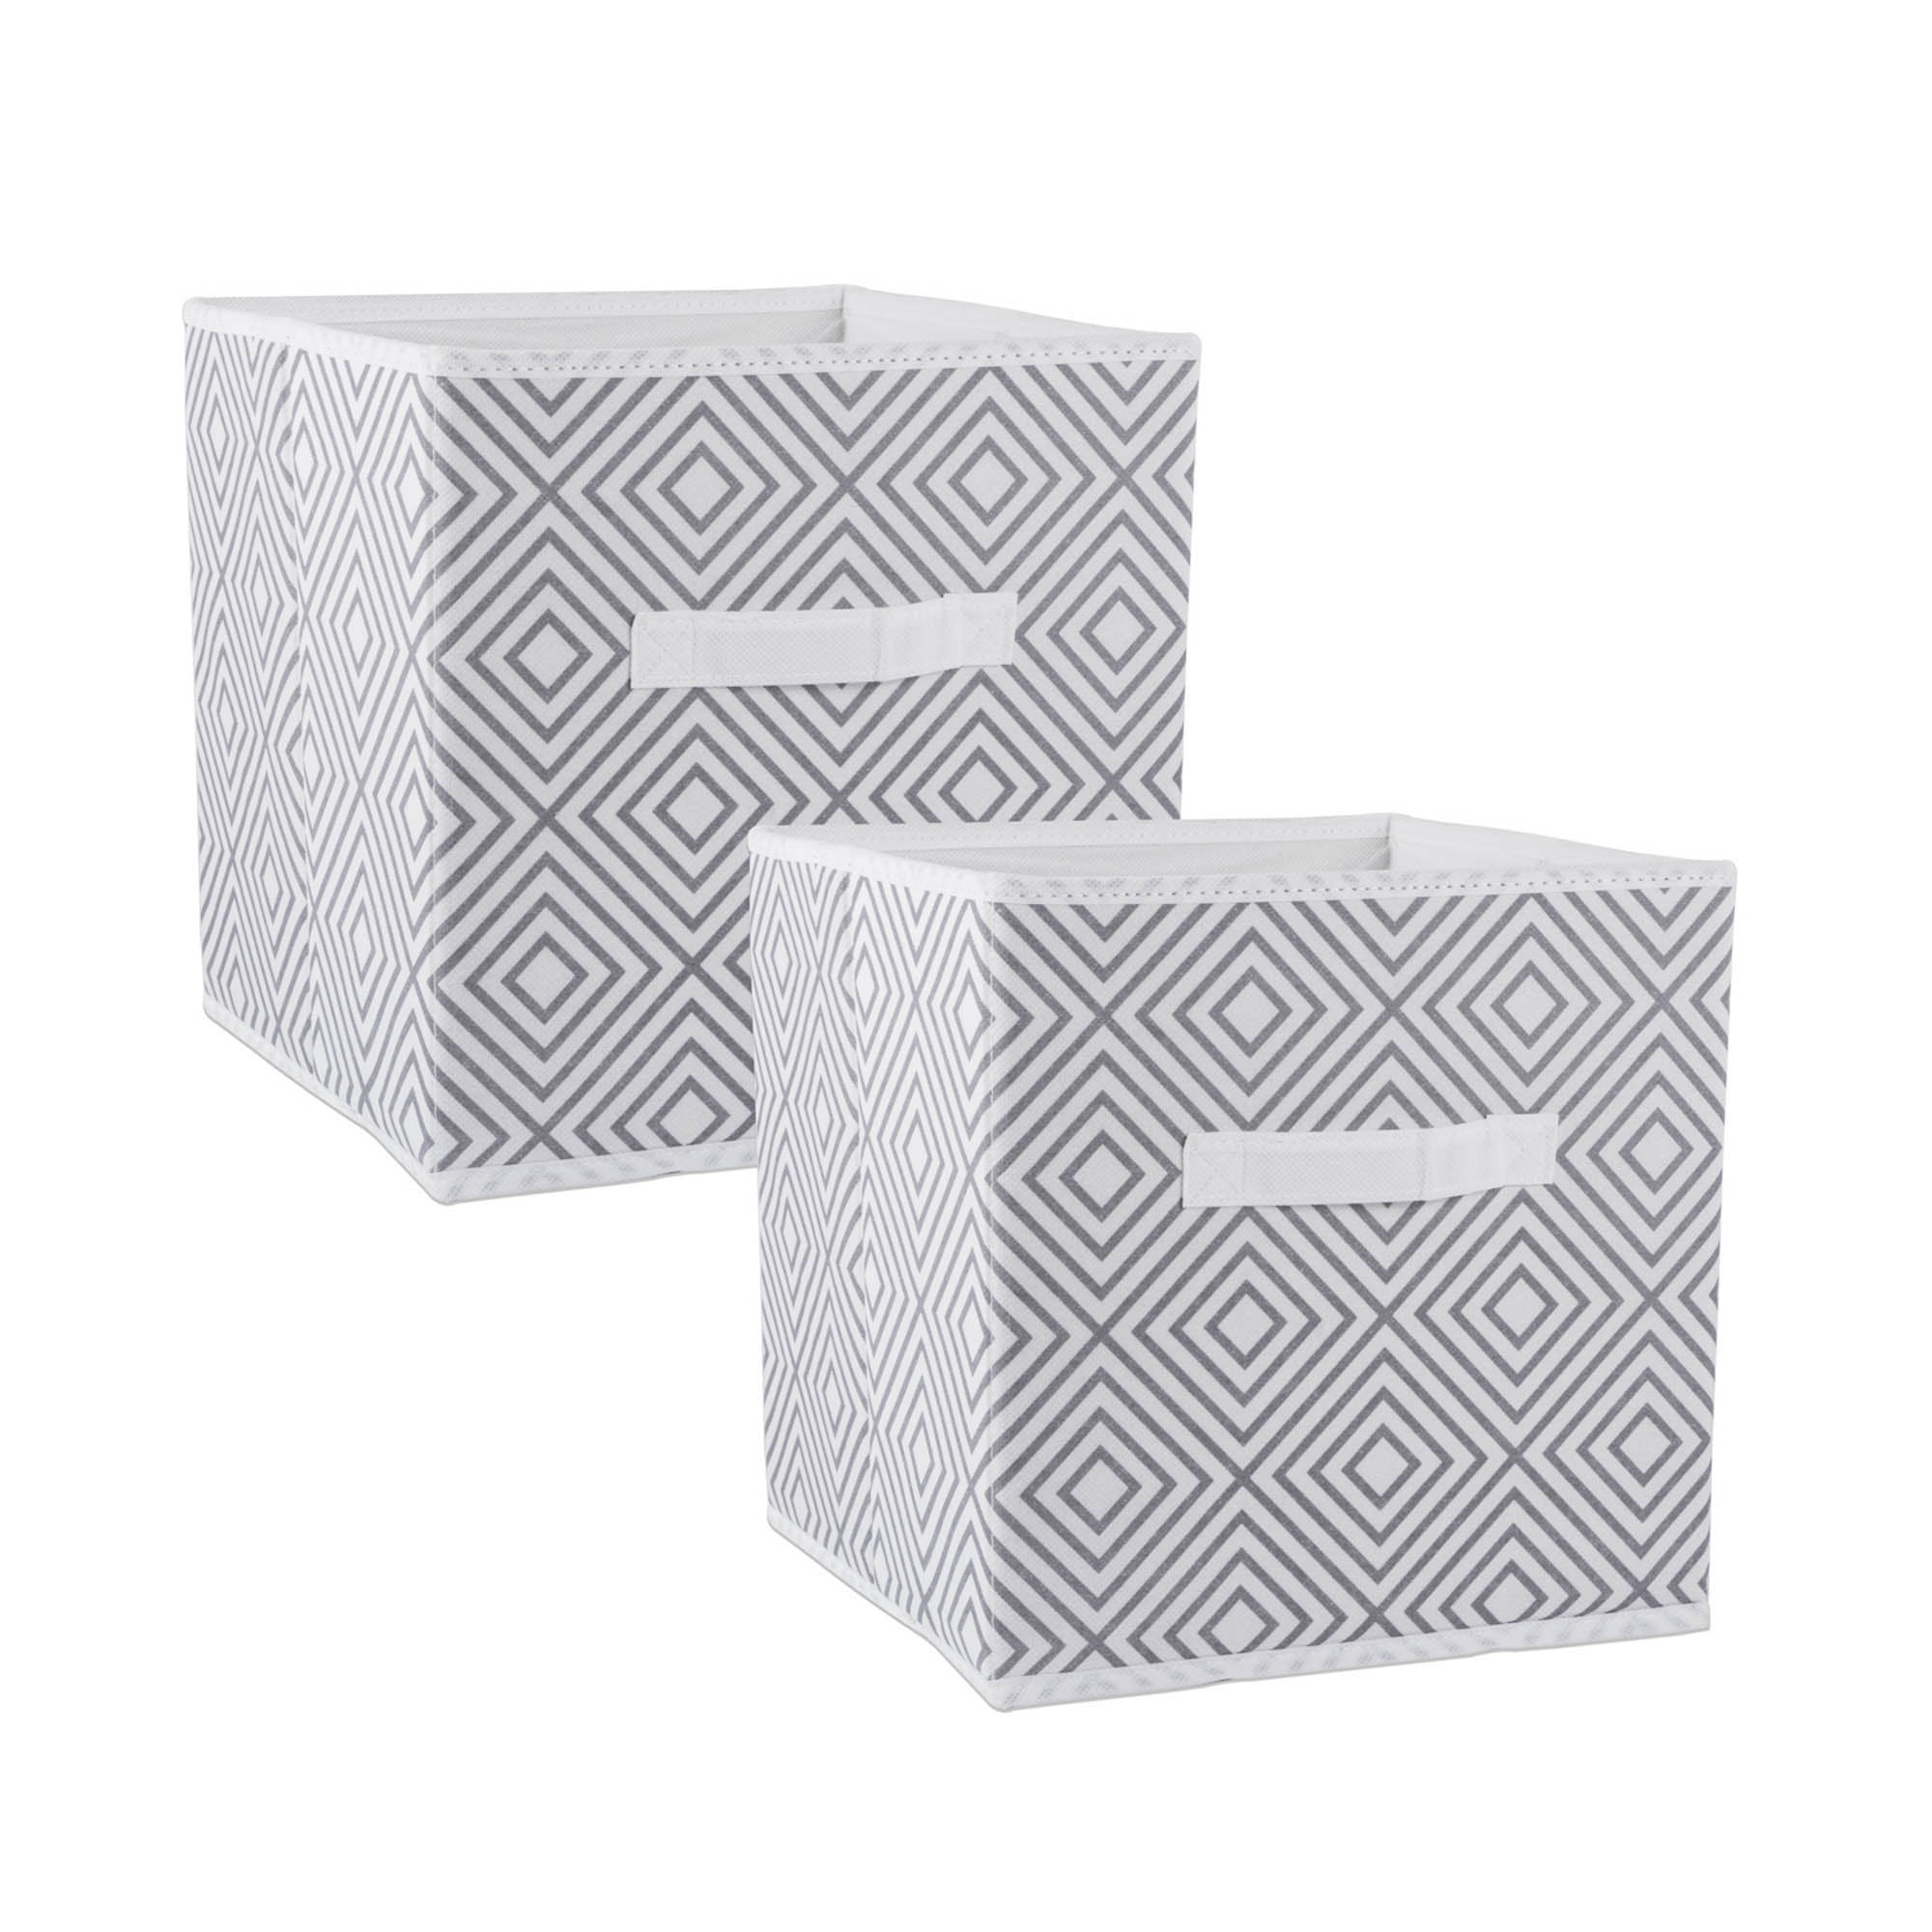 Offices Containers are Made to Fit Standard Cube Organizers Aqua Small DII Foldable Fabric Storage Bins for Nursery Home 2